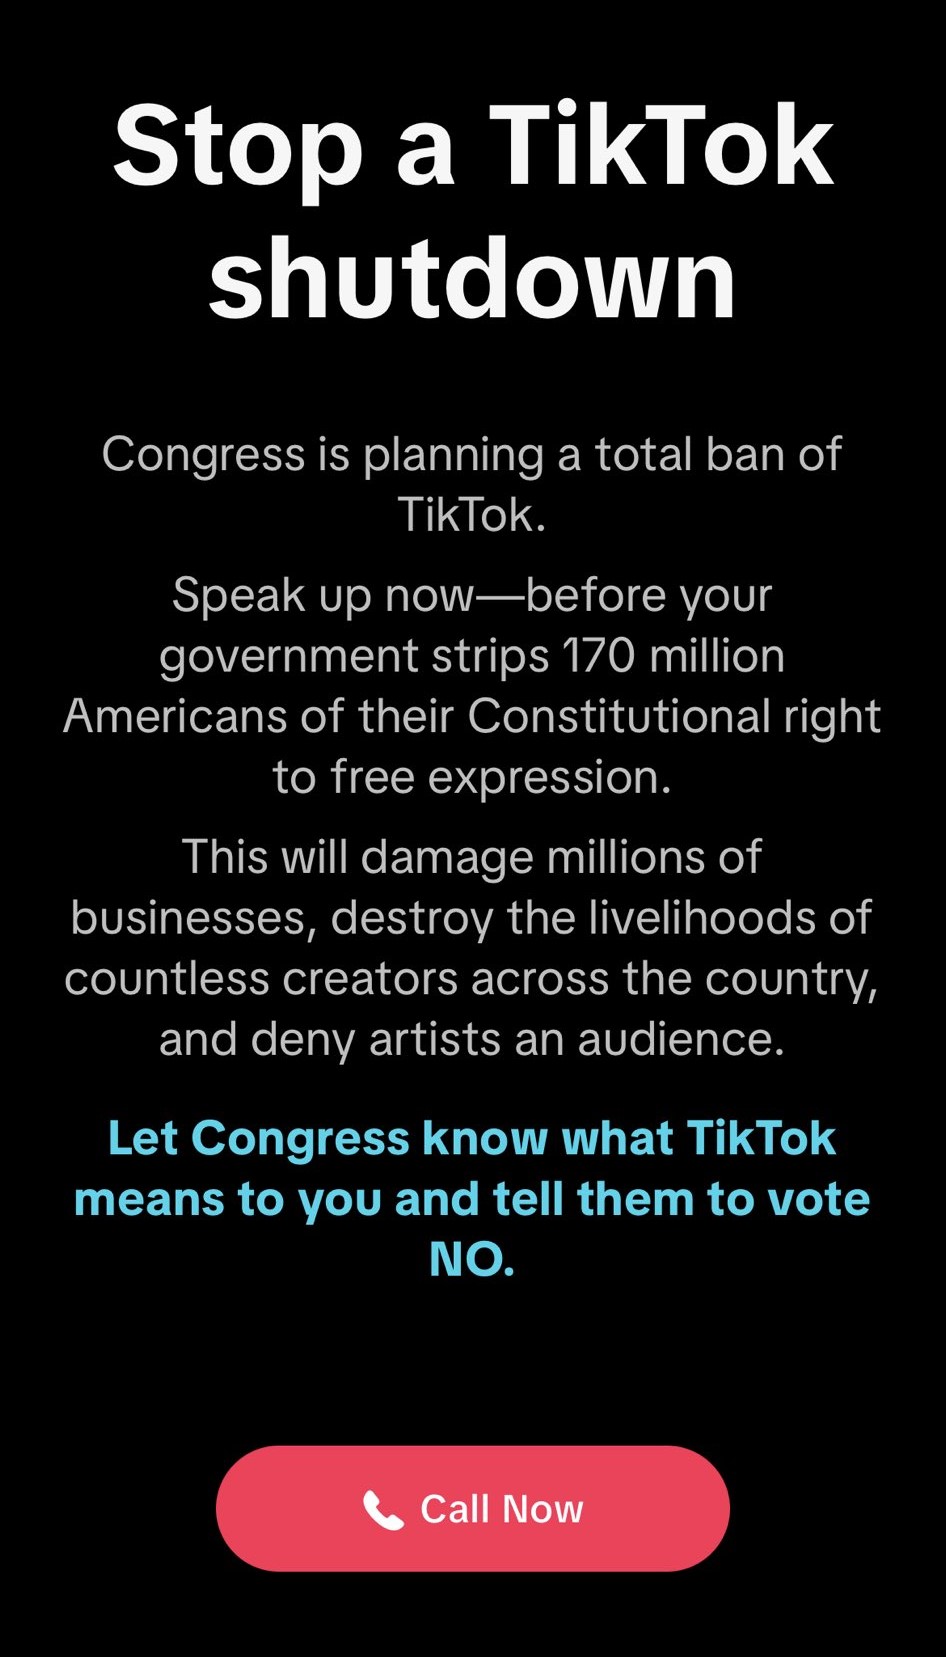 A screenshot of a black screen with bold writing that says "Stop a TikTok shutdown" with instructions to call Congress.